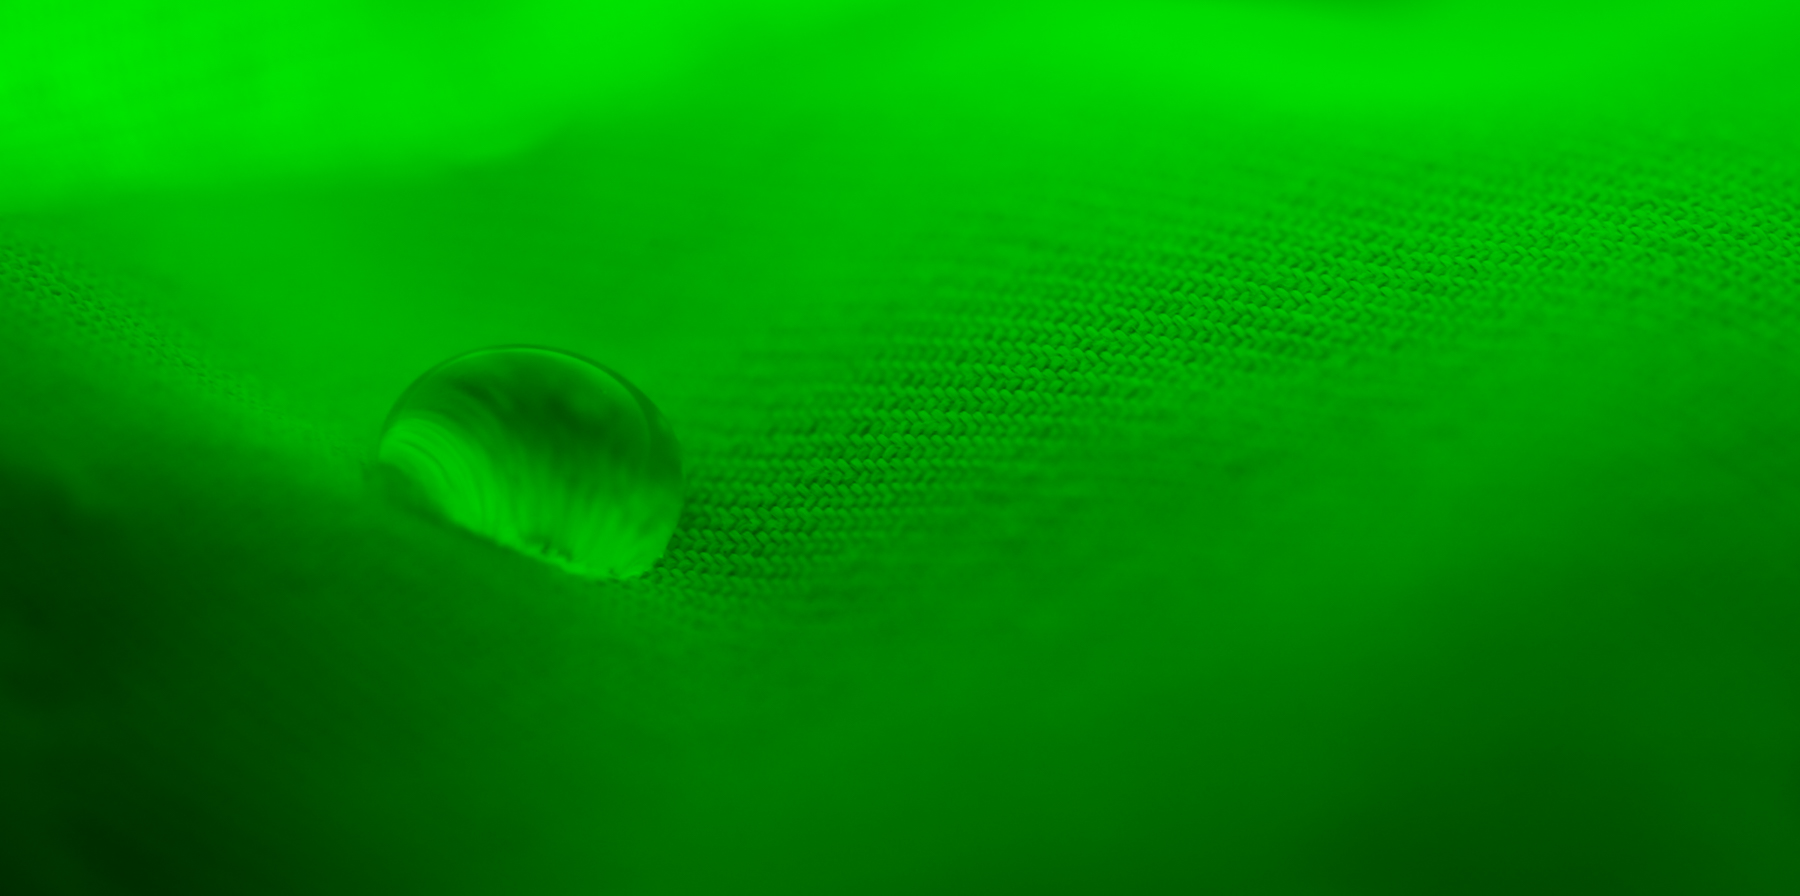 Macro Fine Art photo of a water droplet on a green textile.